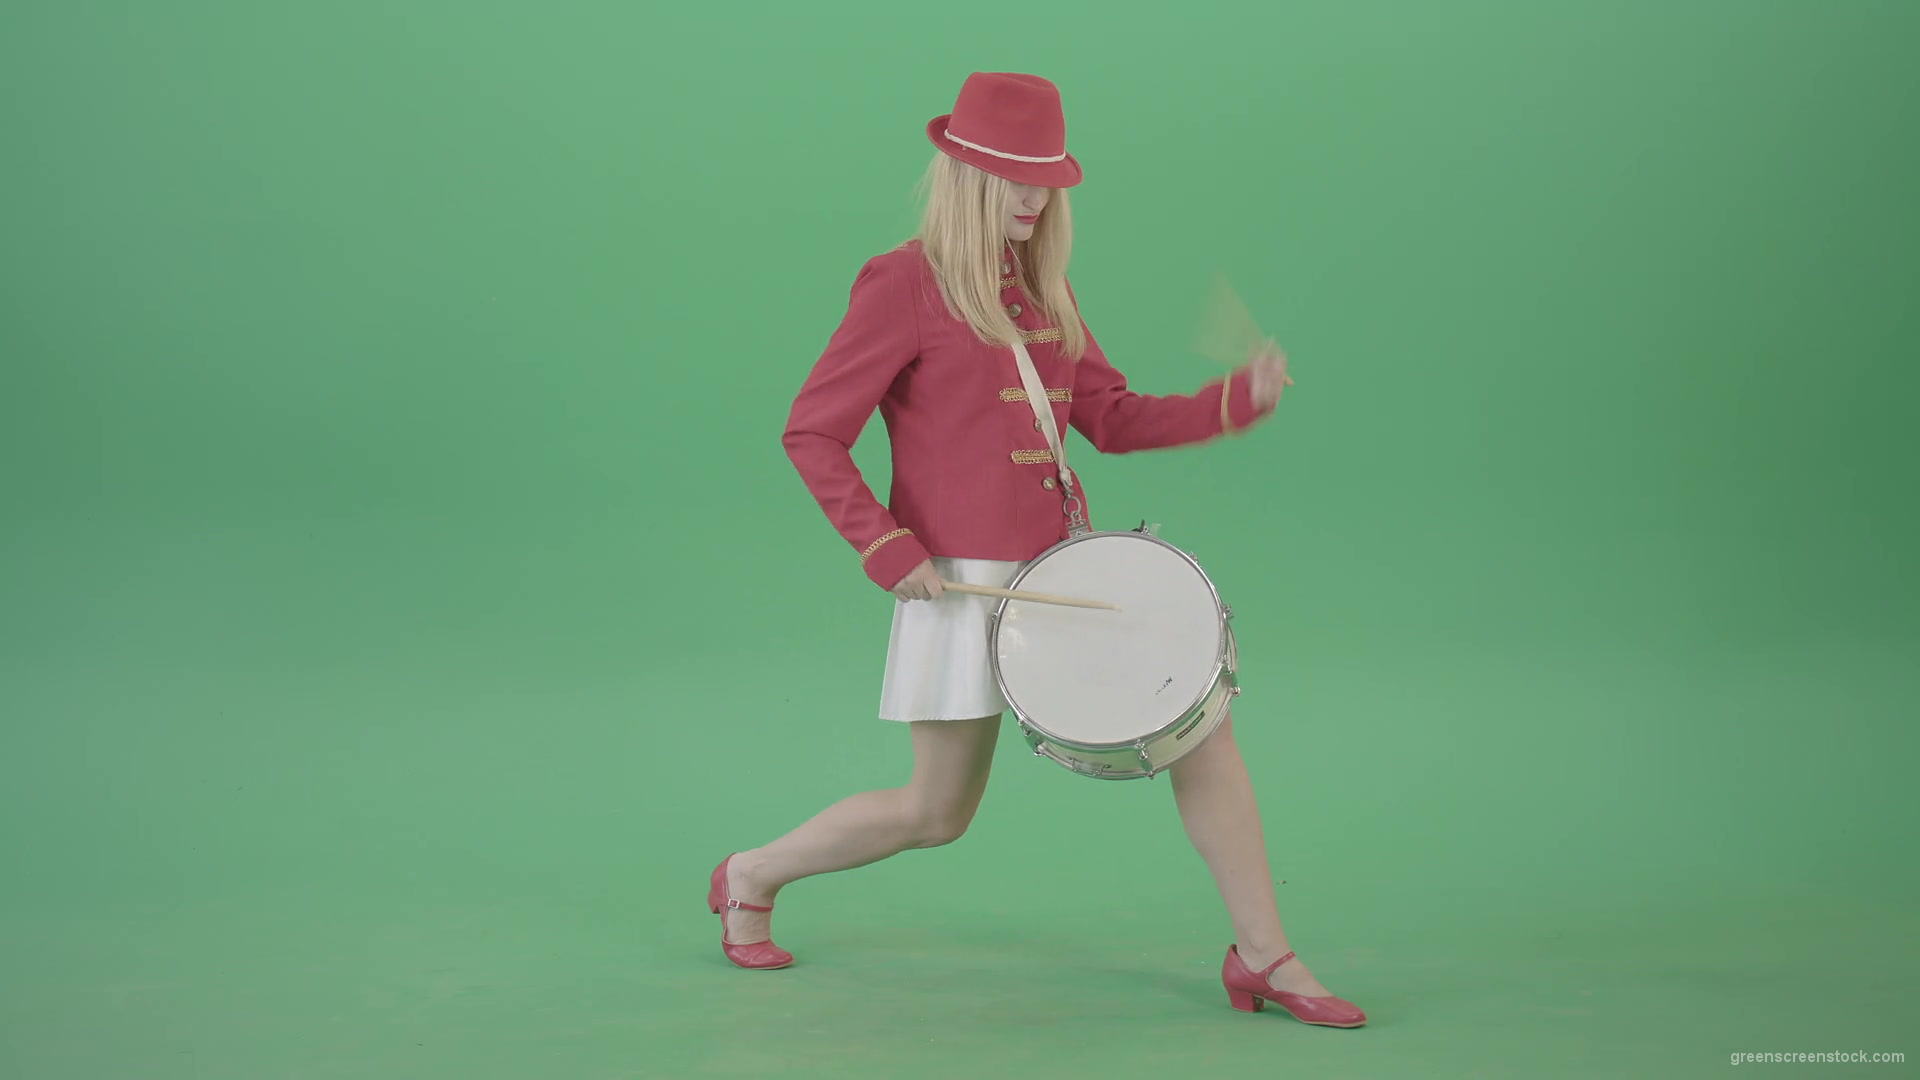 Blonde-Girl-in-Red-Uniform-making-beats-on-music-drum-instrument-in-active-pose-on-green-screen-4K-Video-Footage-1920_005 Green Screen Stock